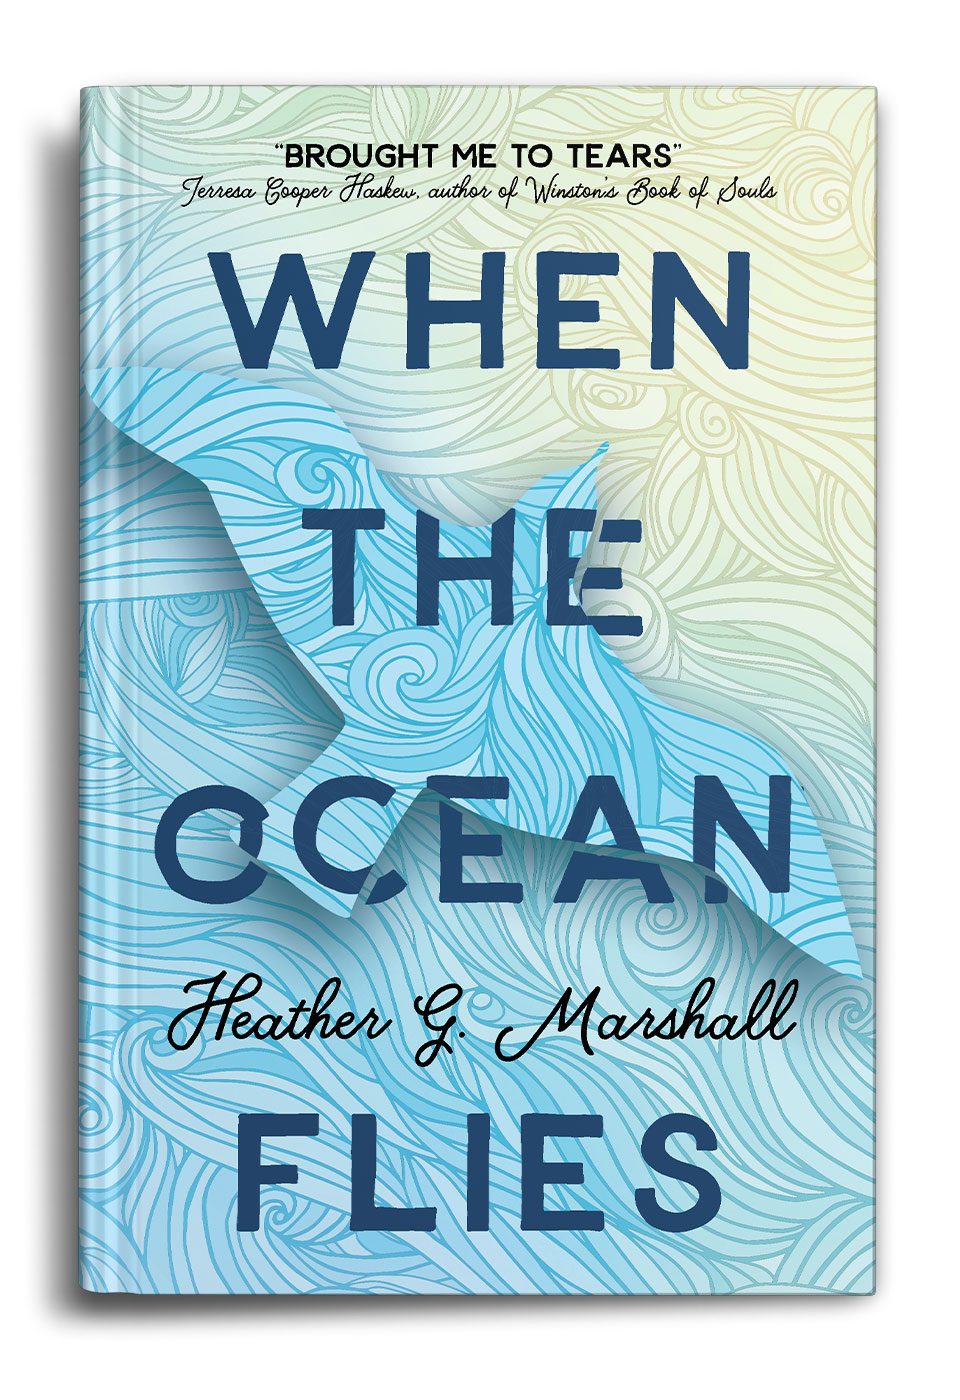 When the Ocean Flies by Heather G. Marshall